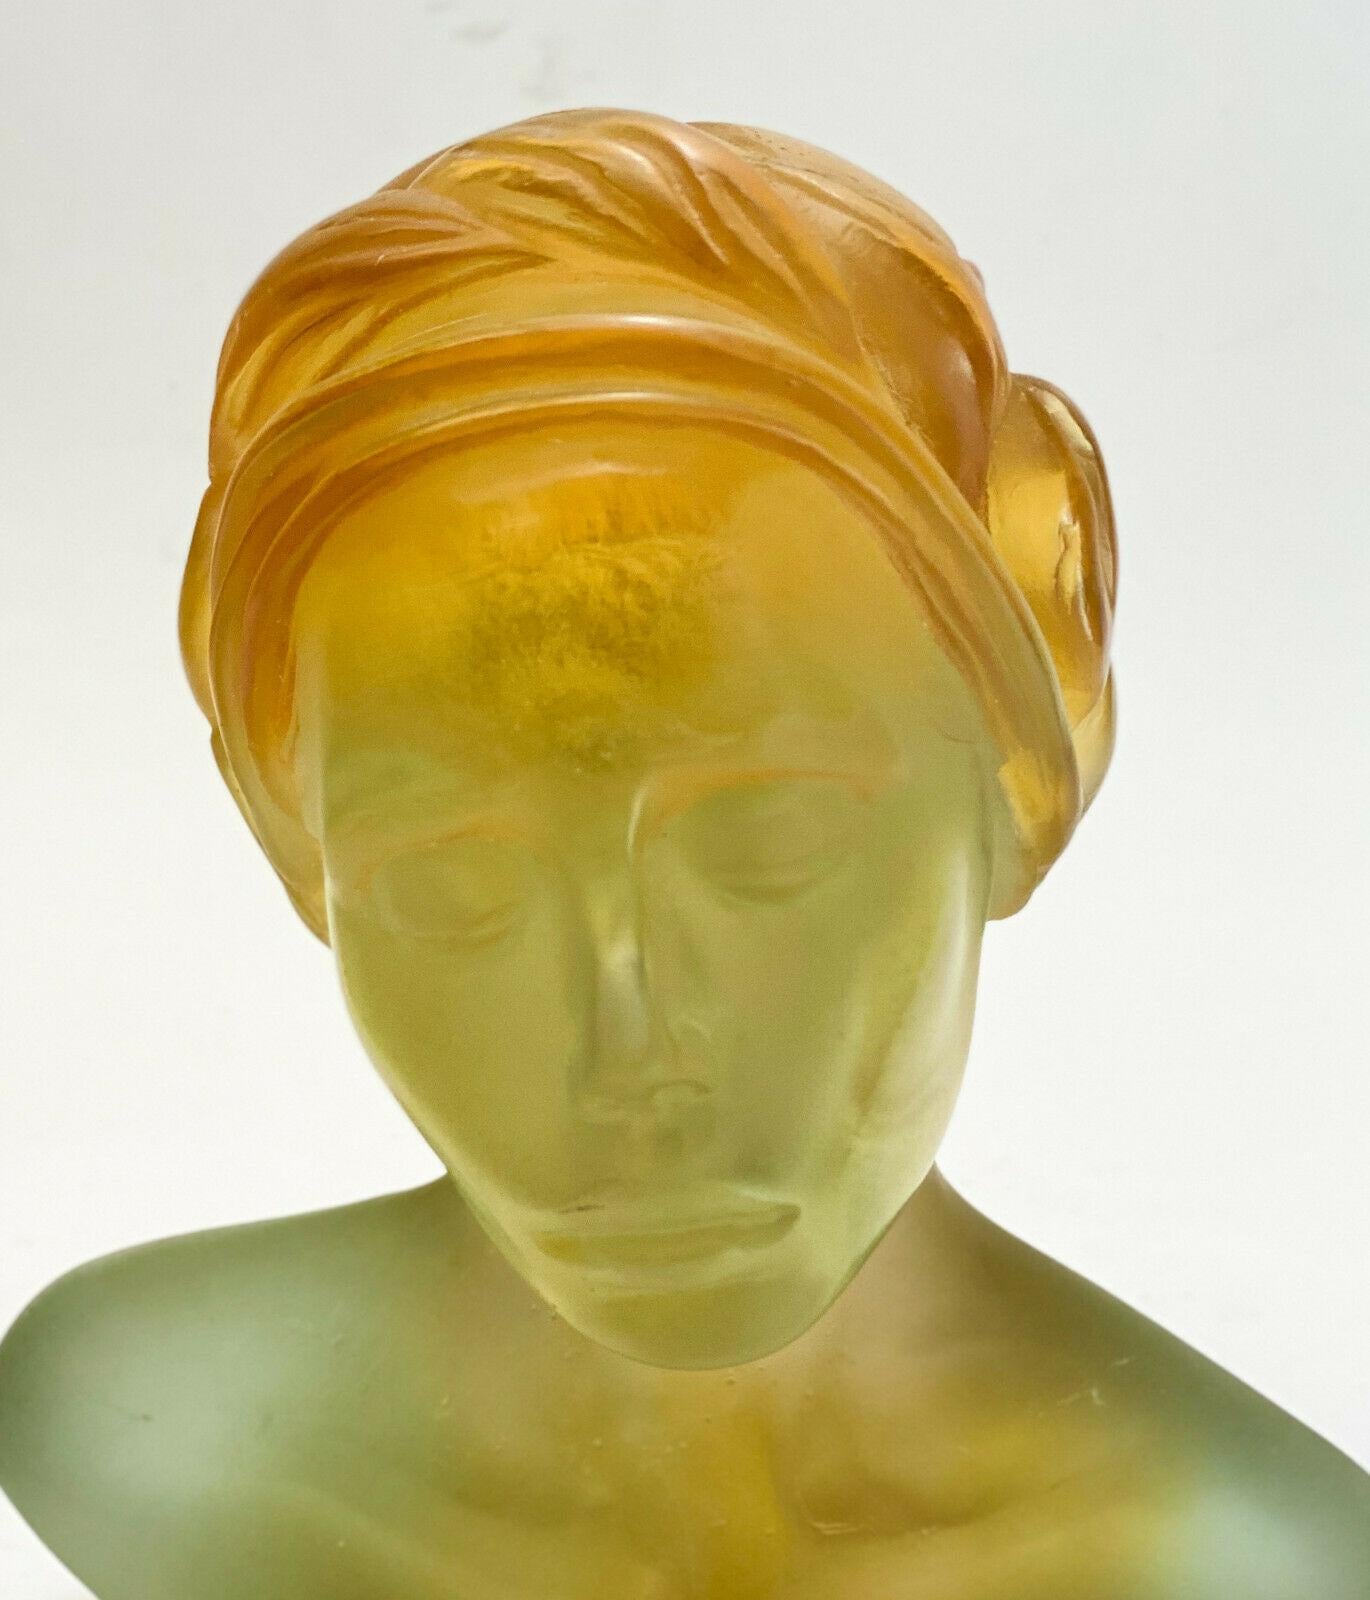 Daum France amber to teal Pate De Verre sculpture - La Persane by Marie-Paule Deville Cabrolle. The sculpture depicts a bust of a beauty with her hair wrapped up in a scarf. Daum marks and artist signature to the verso. Limited edition of 375.